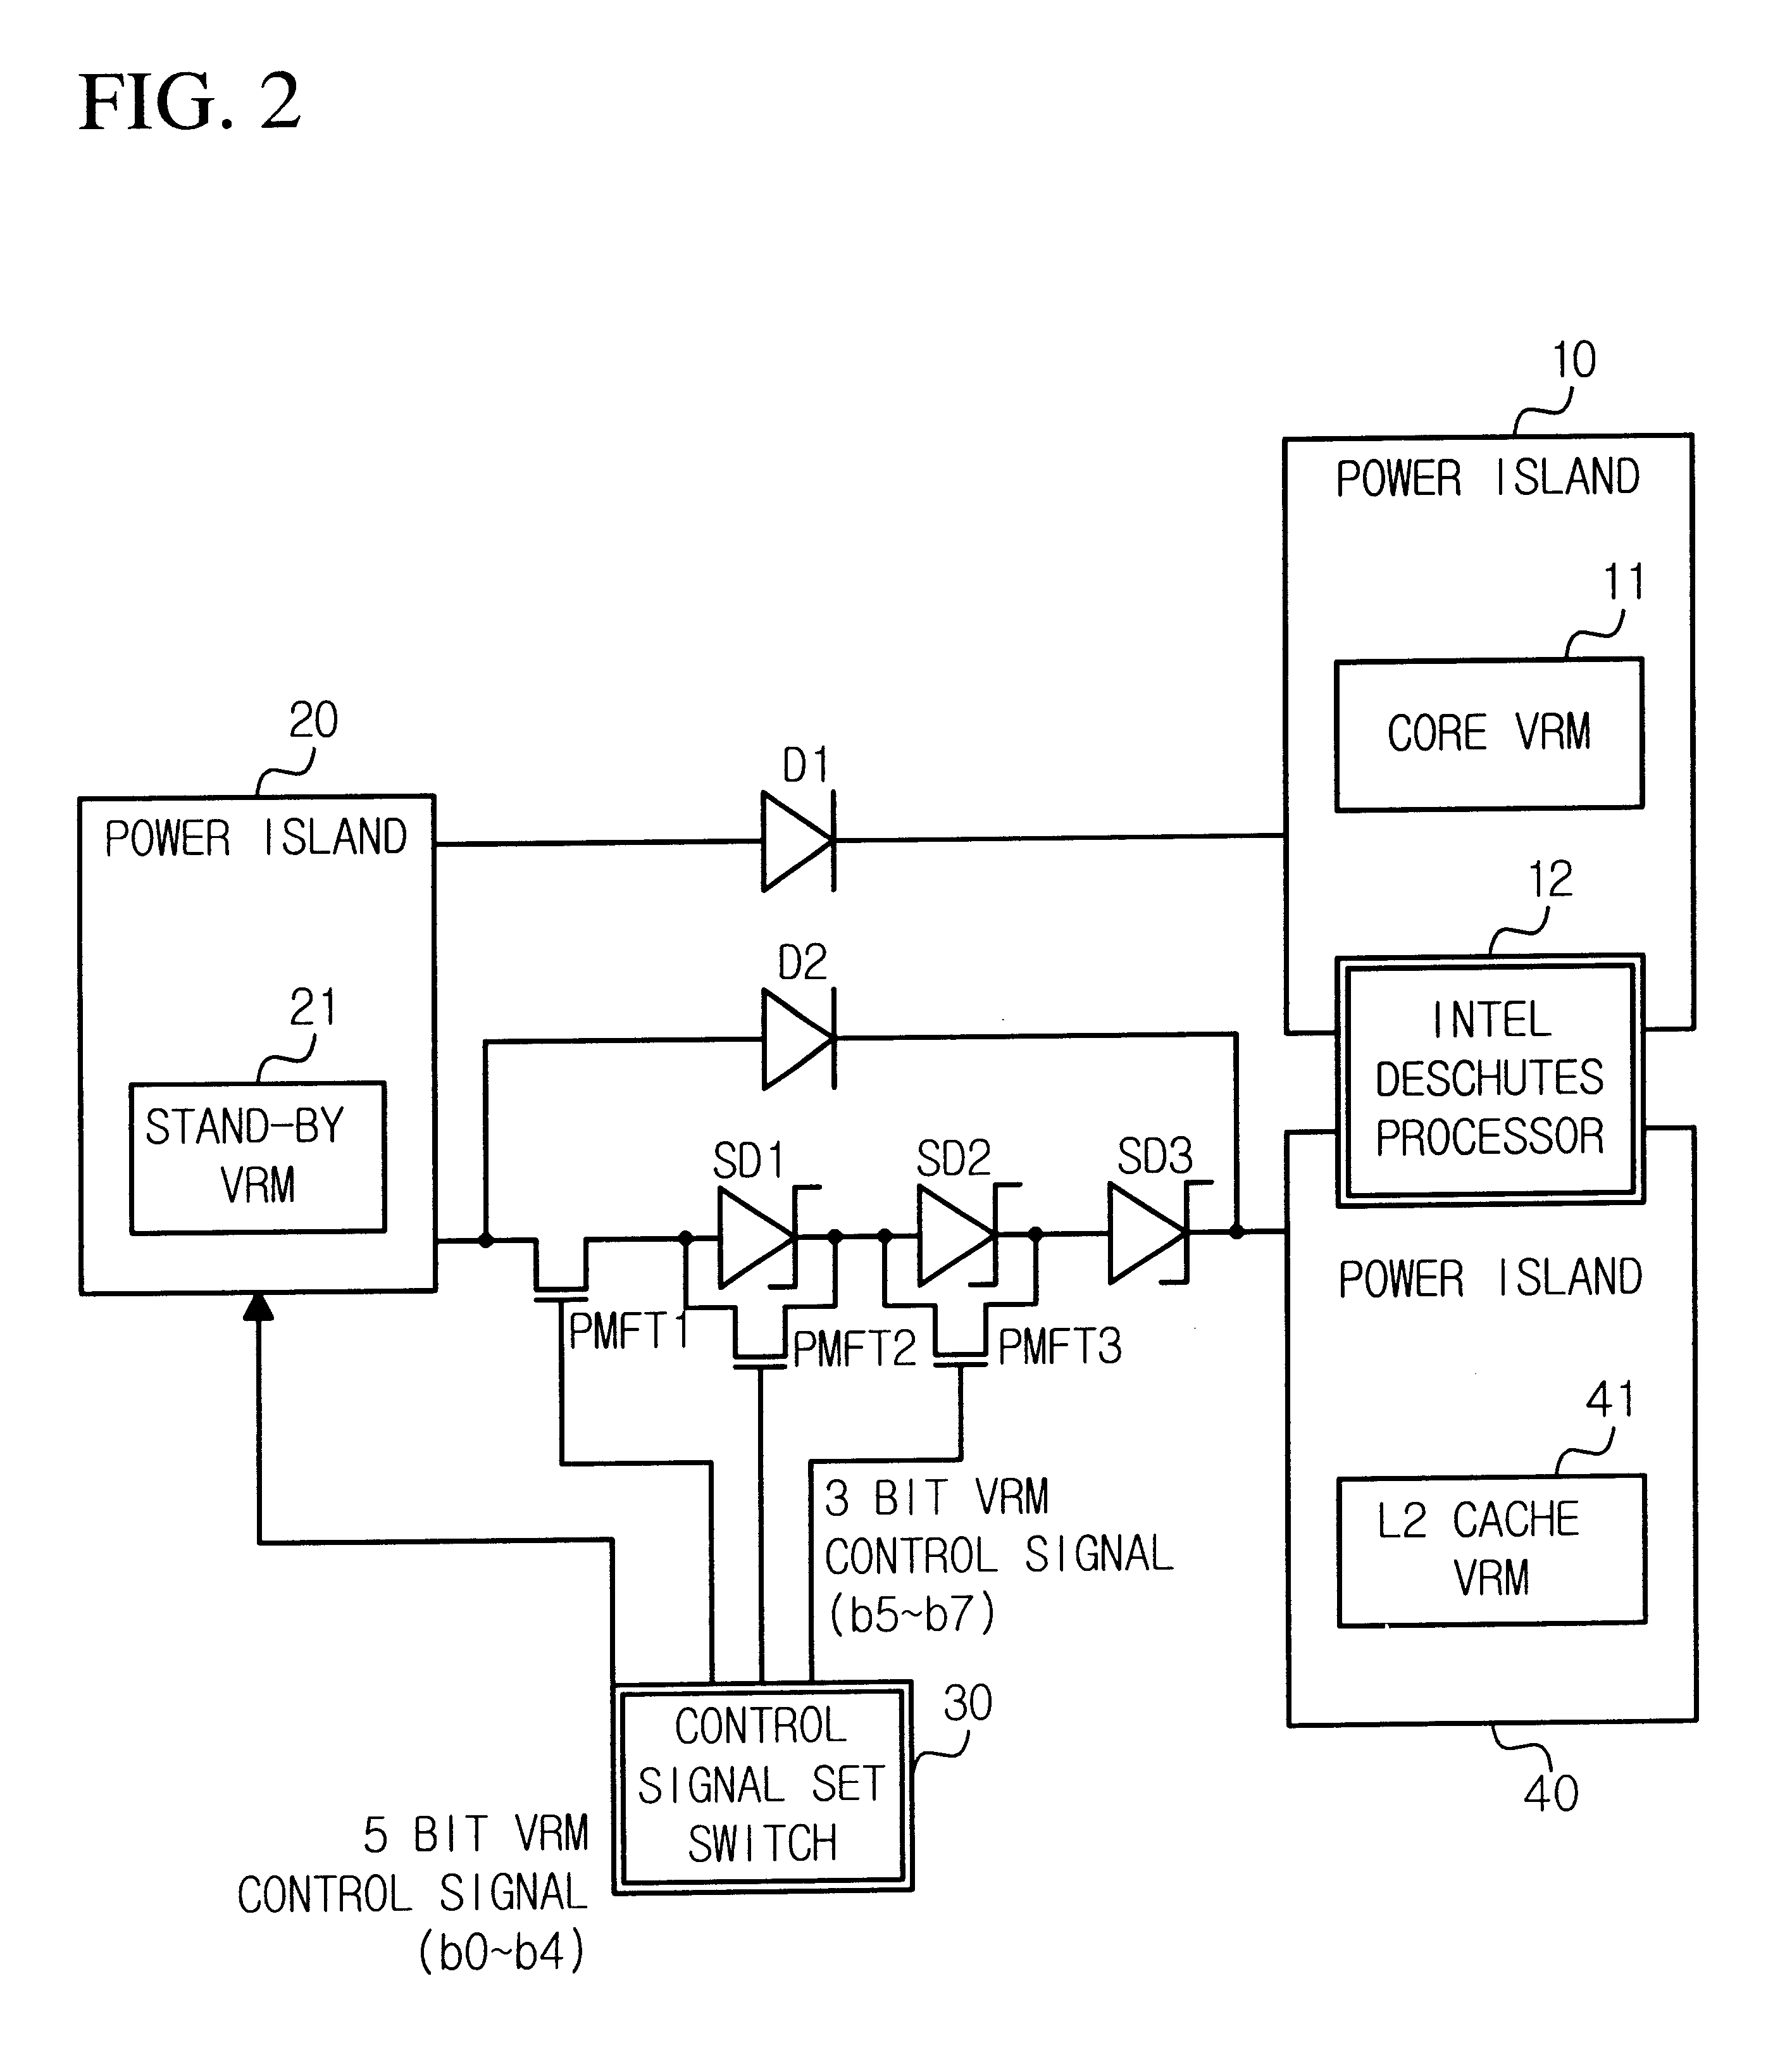 Fault tolerant voltage regulator module circuit for supplying core voltage and cache voltage to a processor